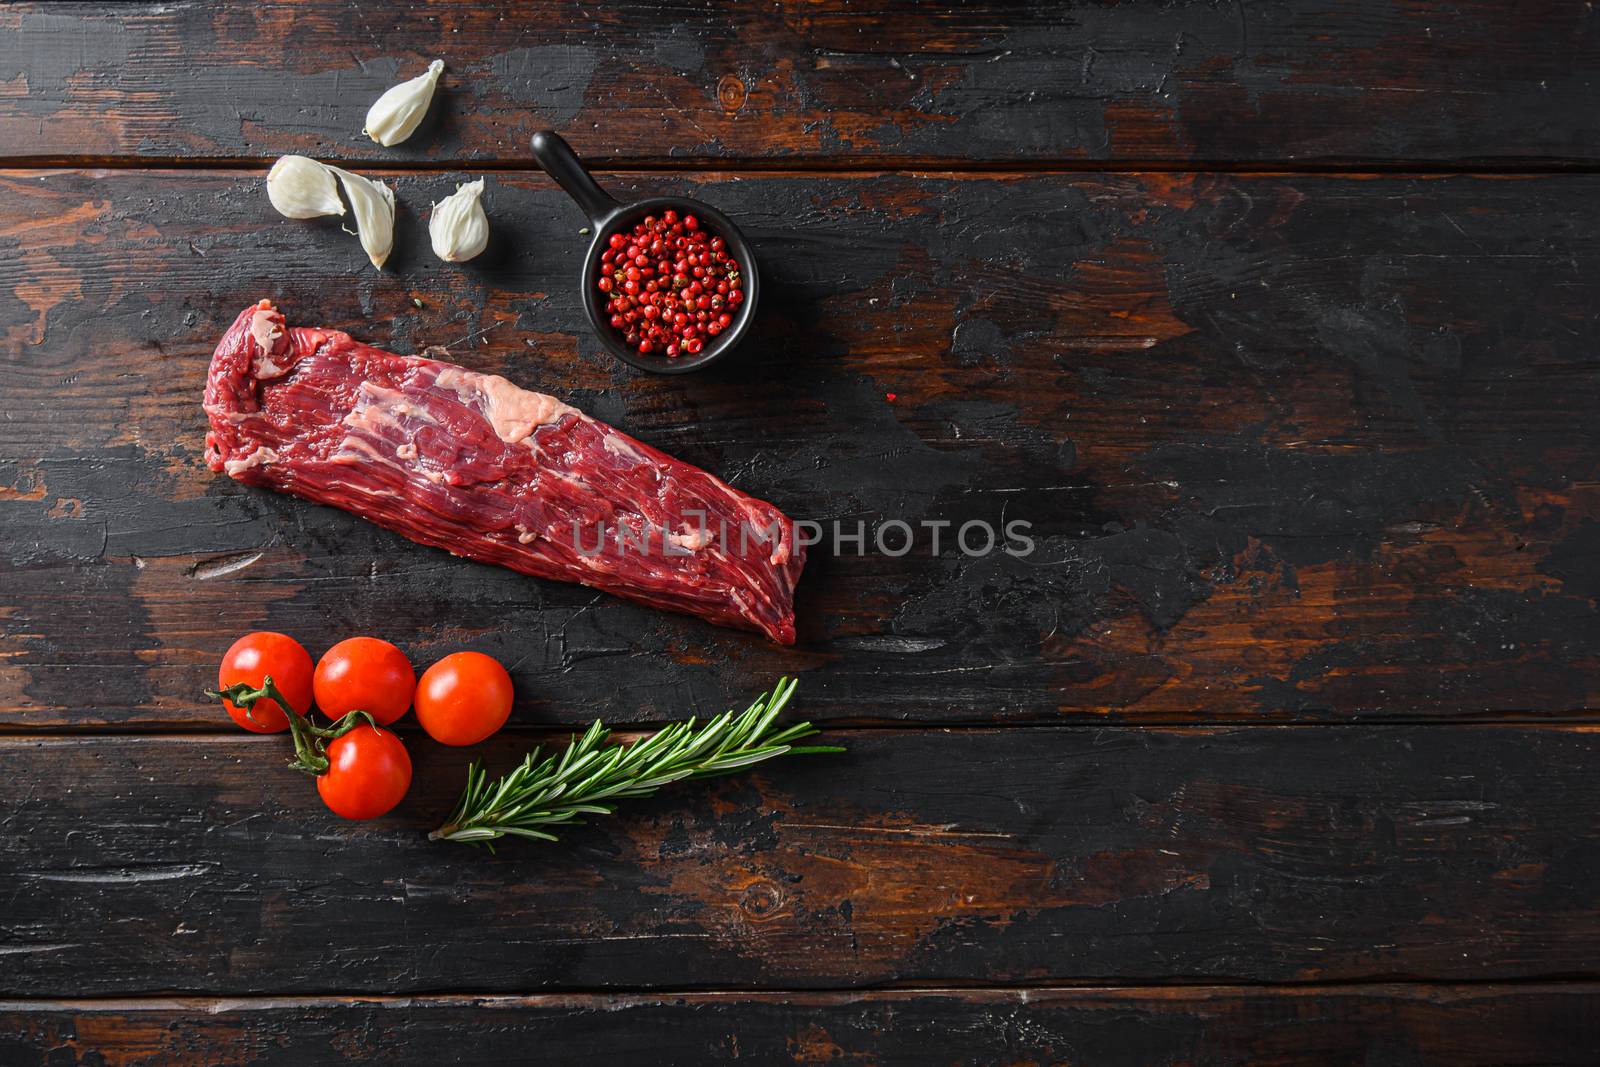 Organic machete steak or hanging tende cut, with rosemary over wood background Top view space for text by Ilianesolenyi